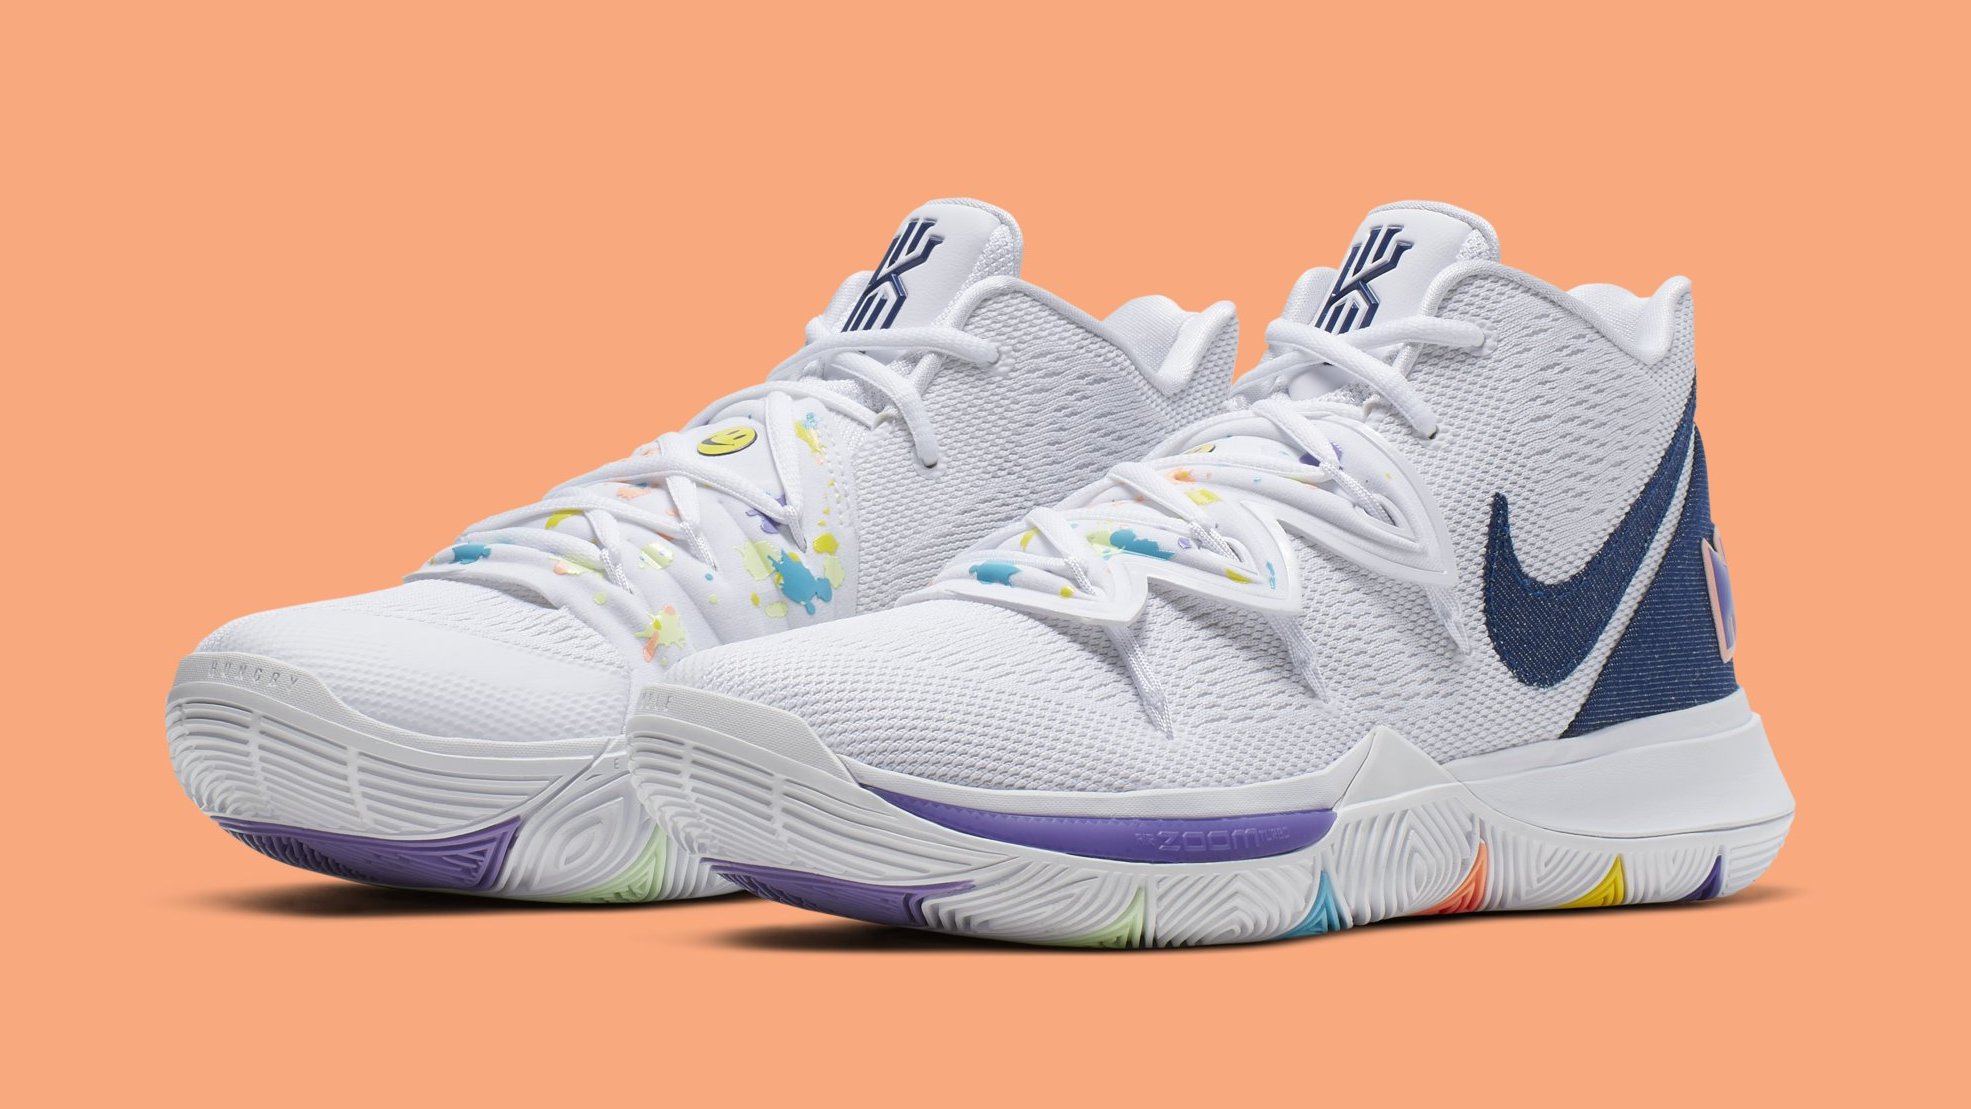 Release Details for the 'Have a Nike Day' Kyrie 5 | Complex